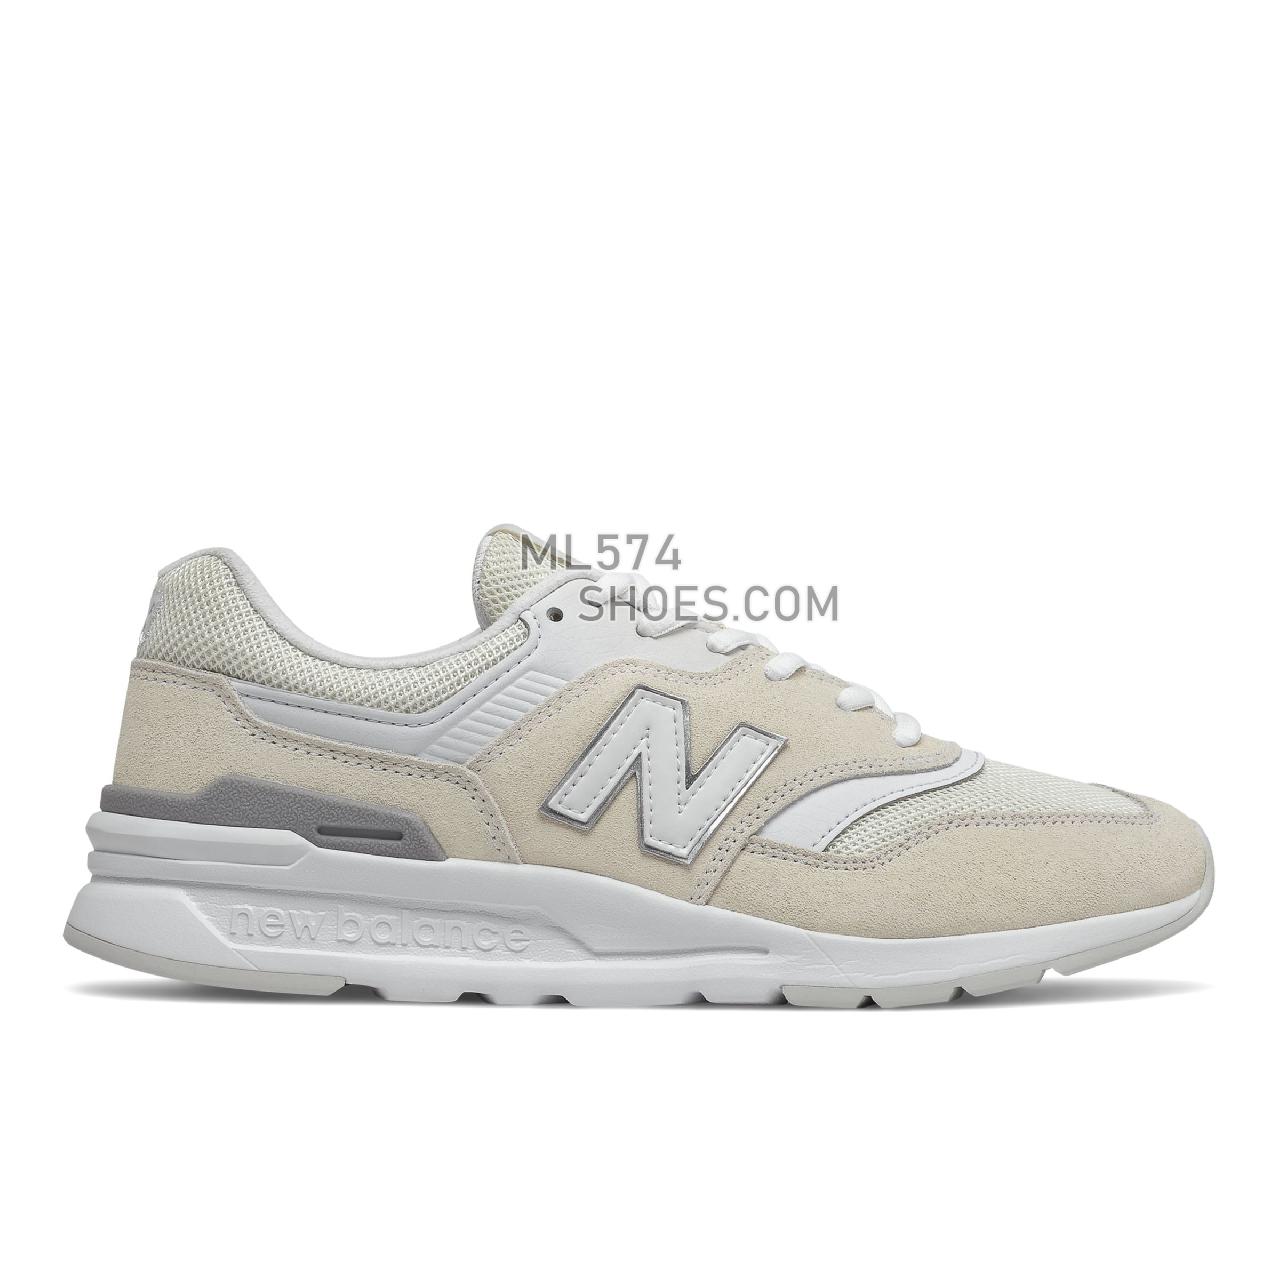 New Balance 997H - Women's Sport Style Sneakers - Turtledove with White - CW997HCO